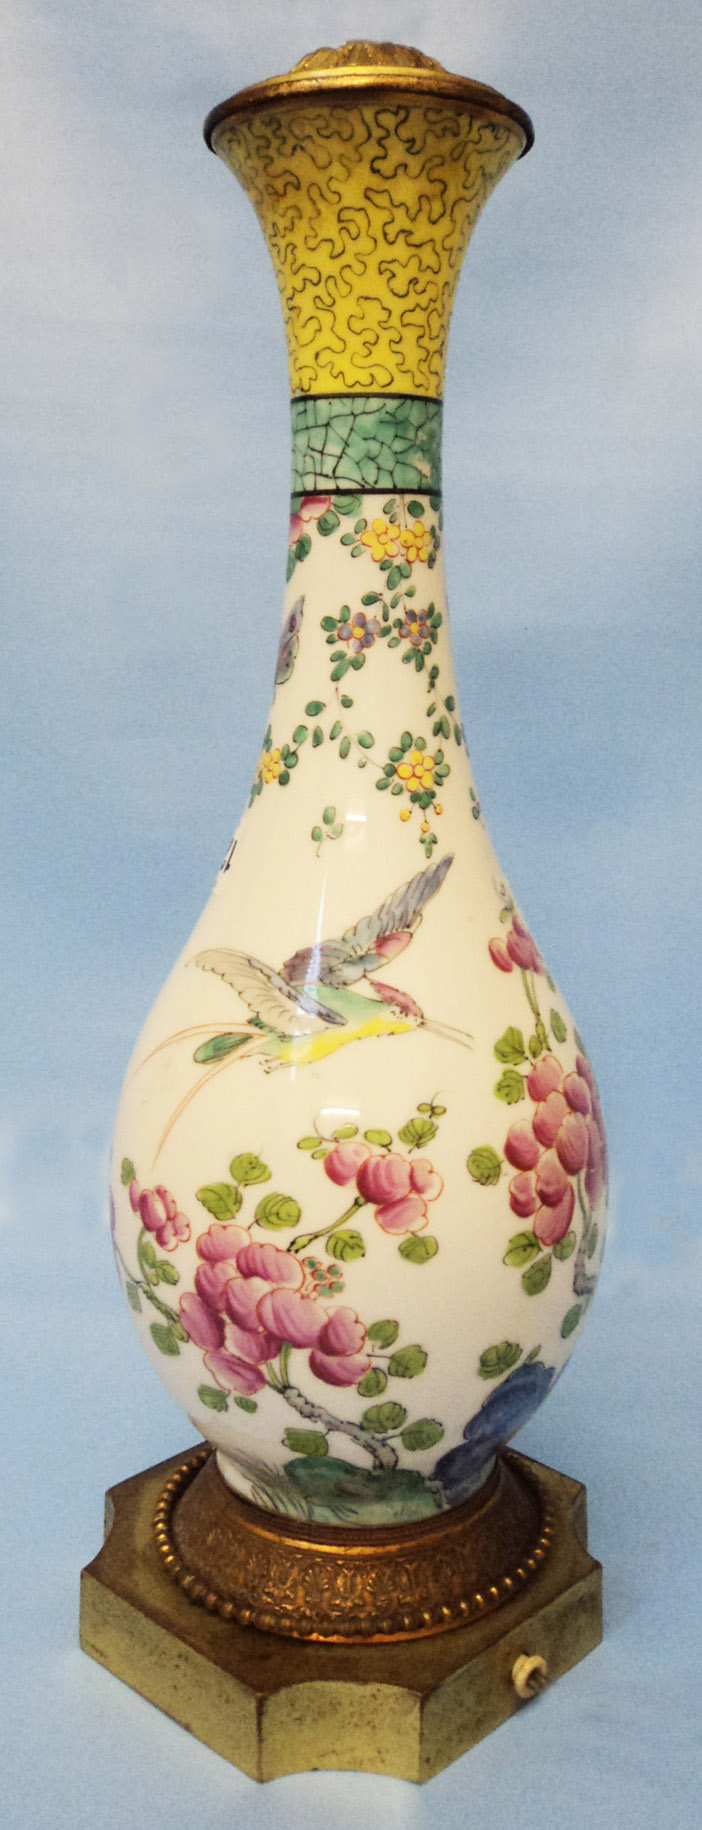 A Chinese bottle vase lamp with flowering branch, bird and insect decoration